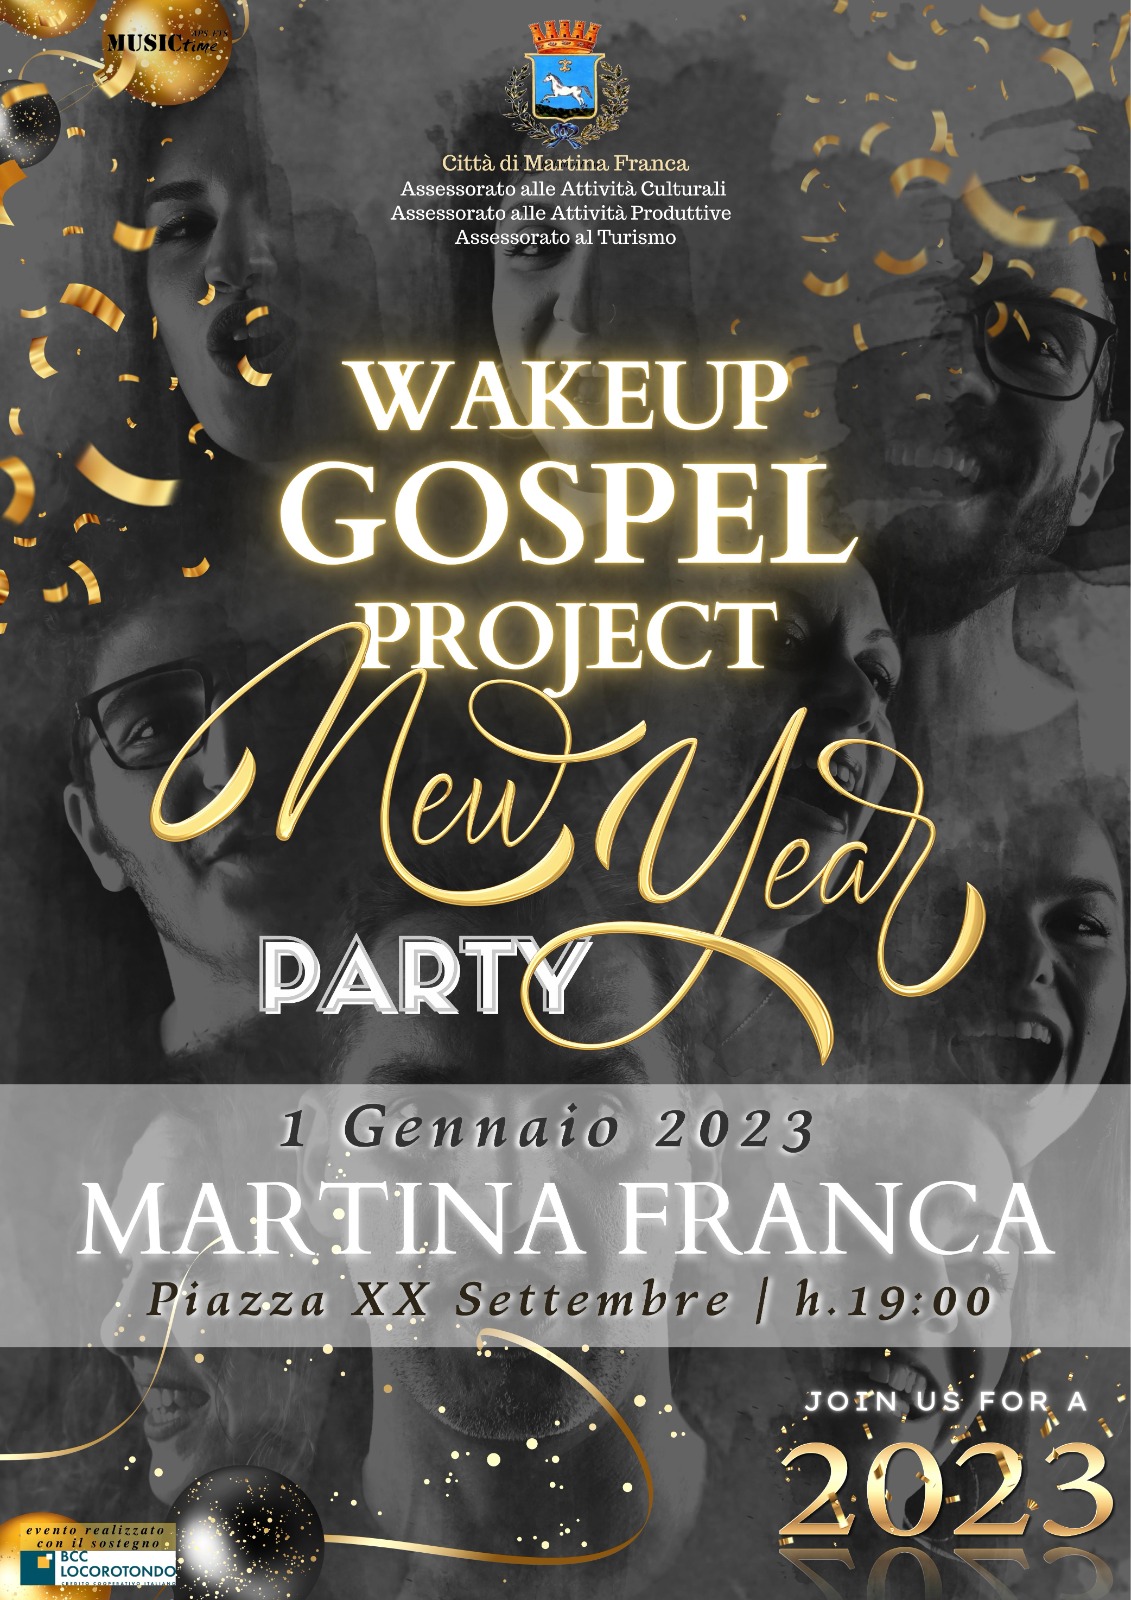 Makeup Gospel Project - New Year Party